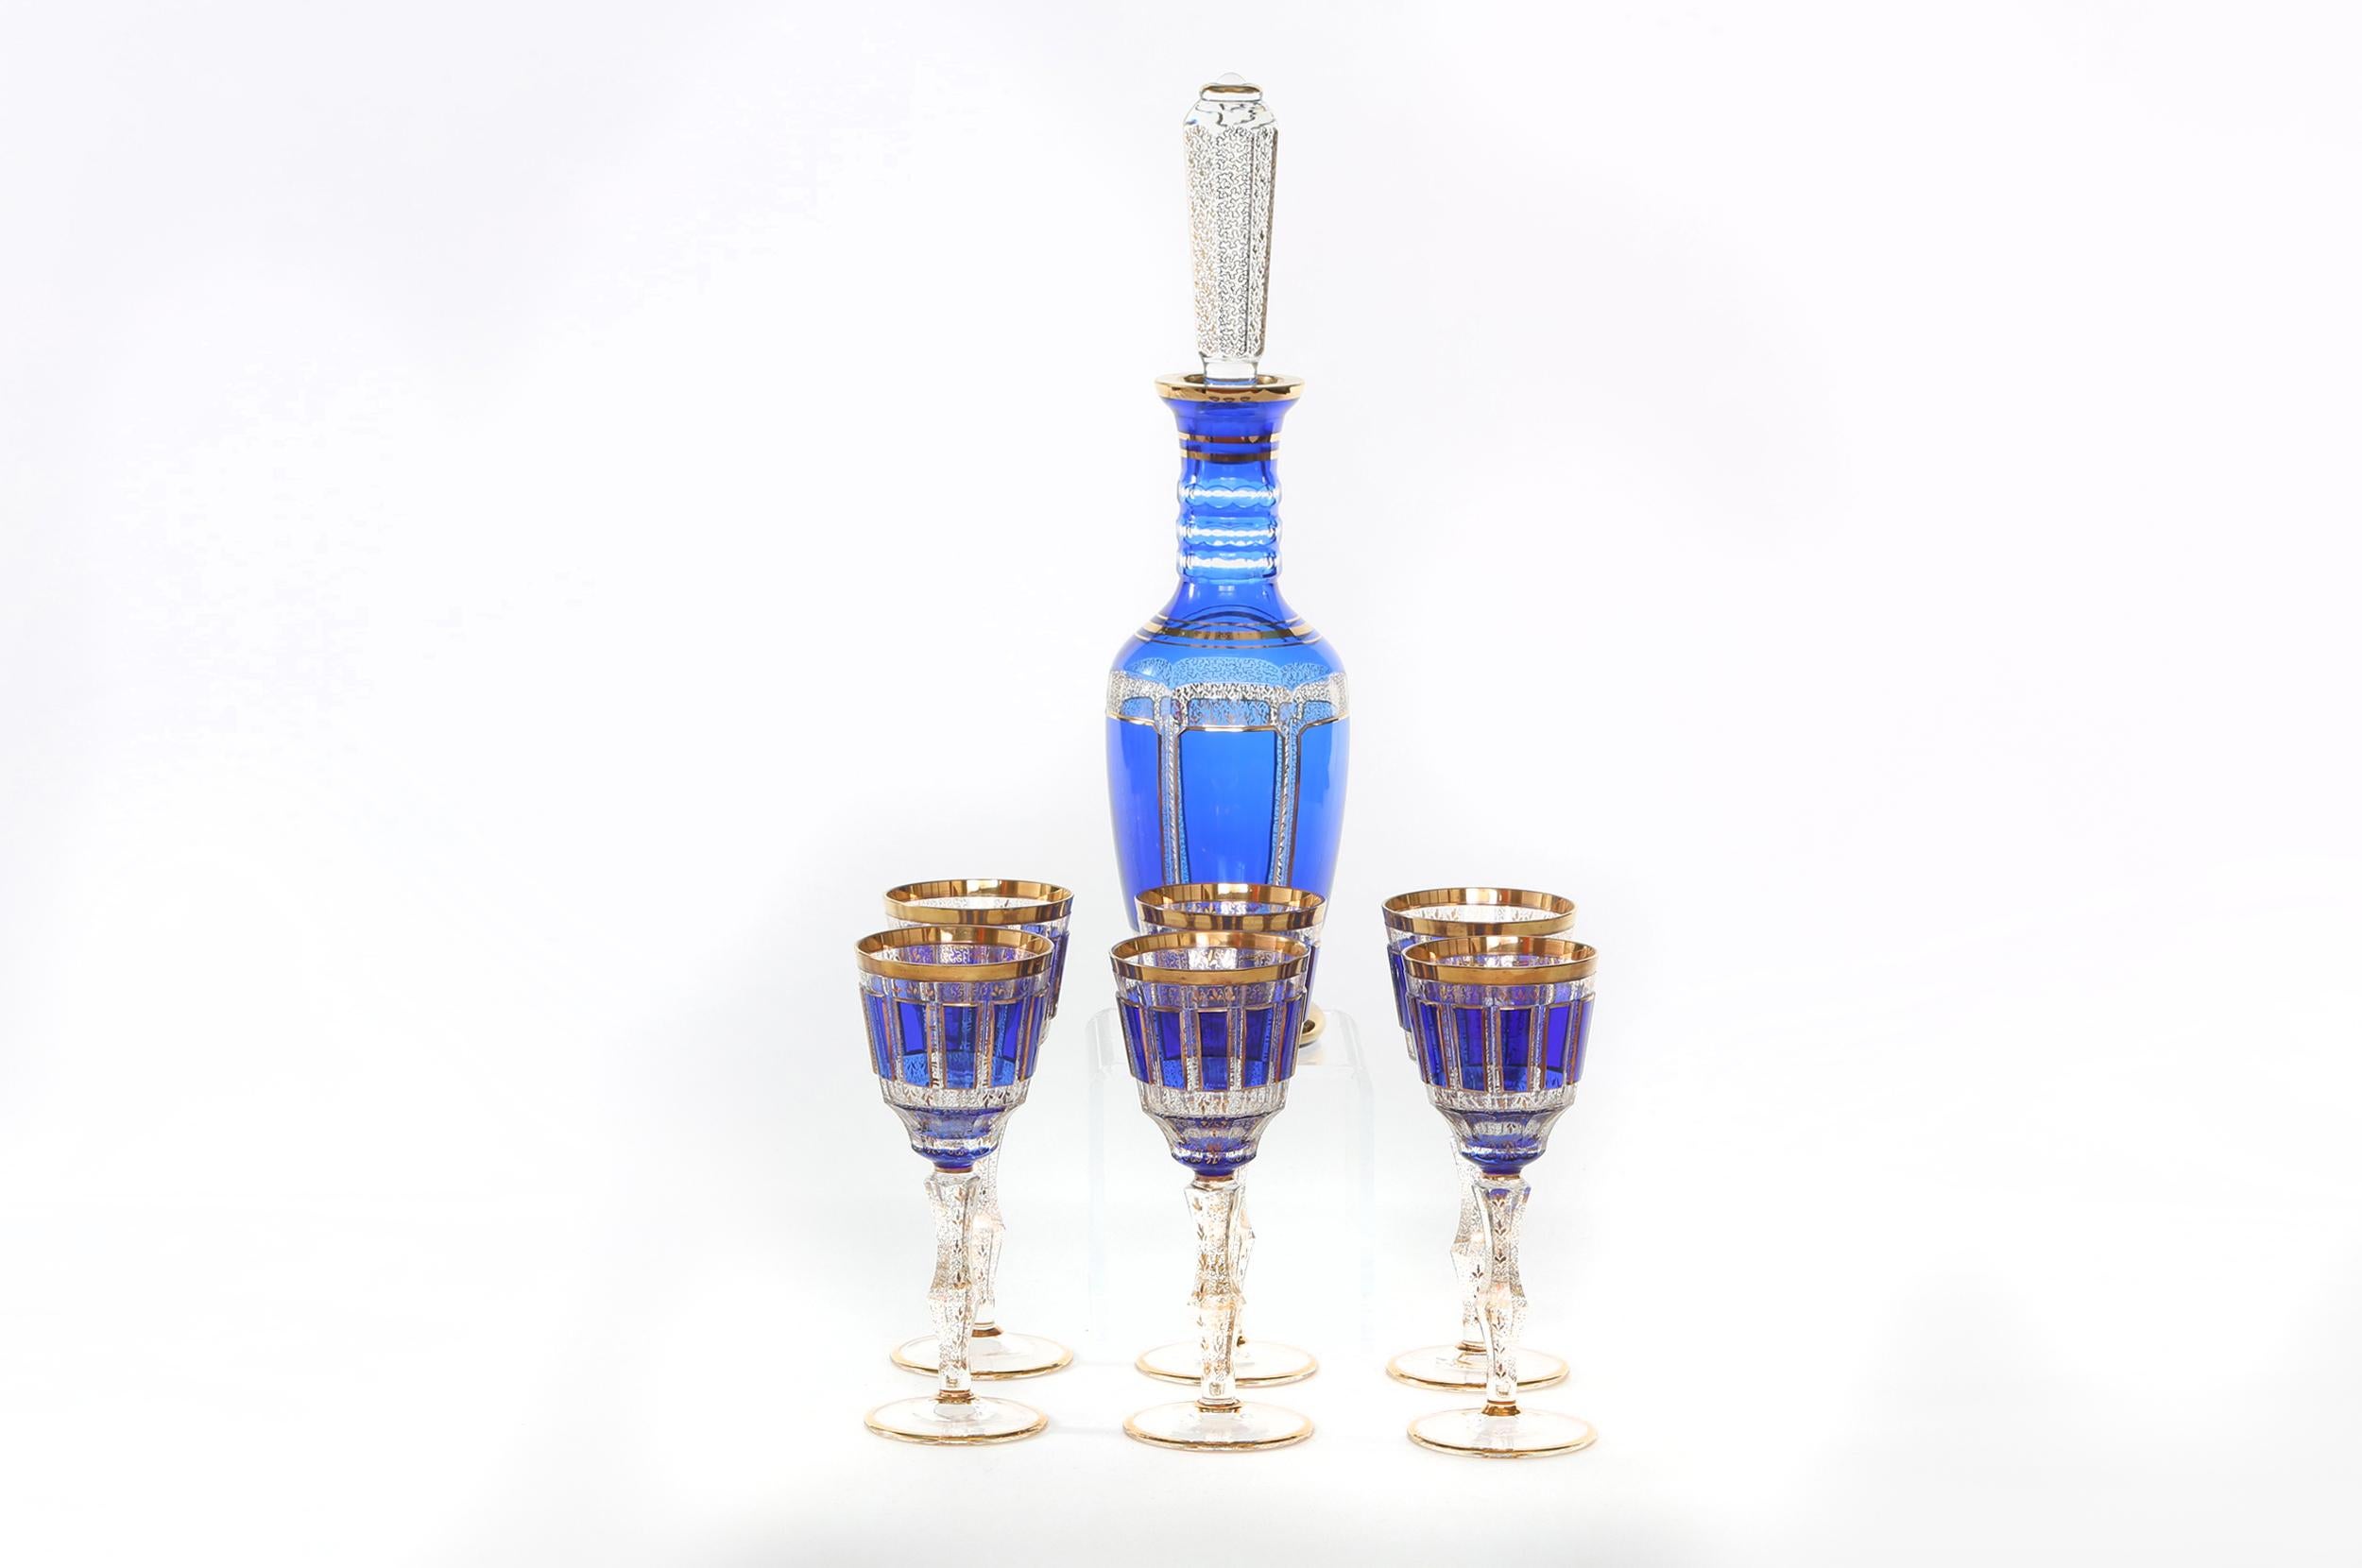 Moser crystal barware or tableware Bohemian hand blown panel cut cobalt blue with gold design details wine glassware with decanter service for six people. Each glass is in great vintage condition. Minor wear consistent with age or use. Each glass